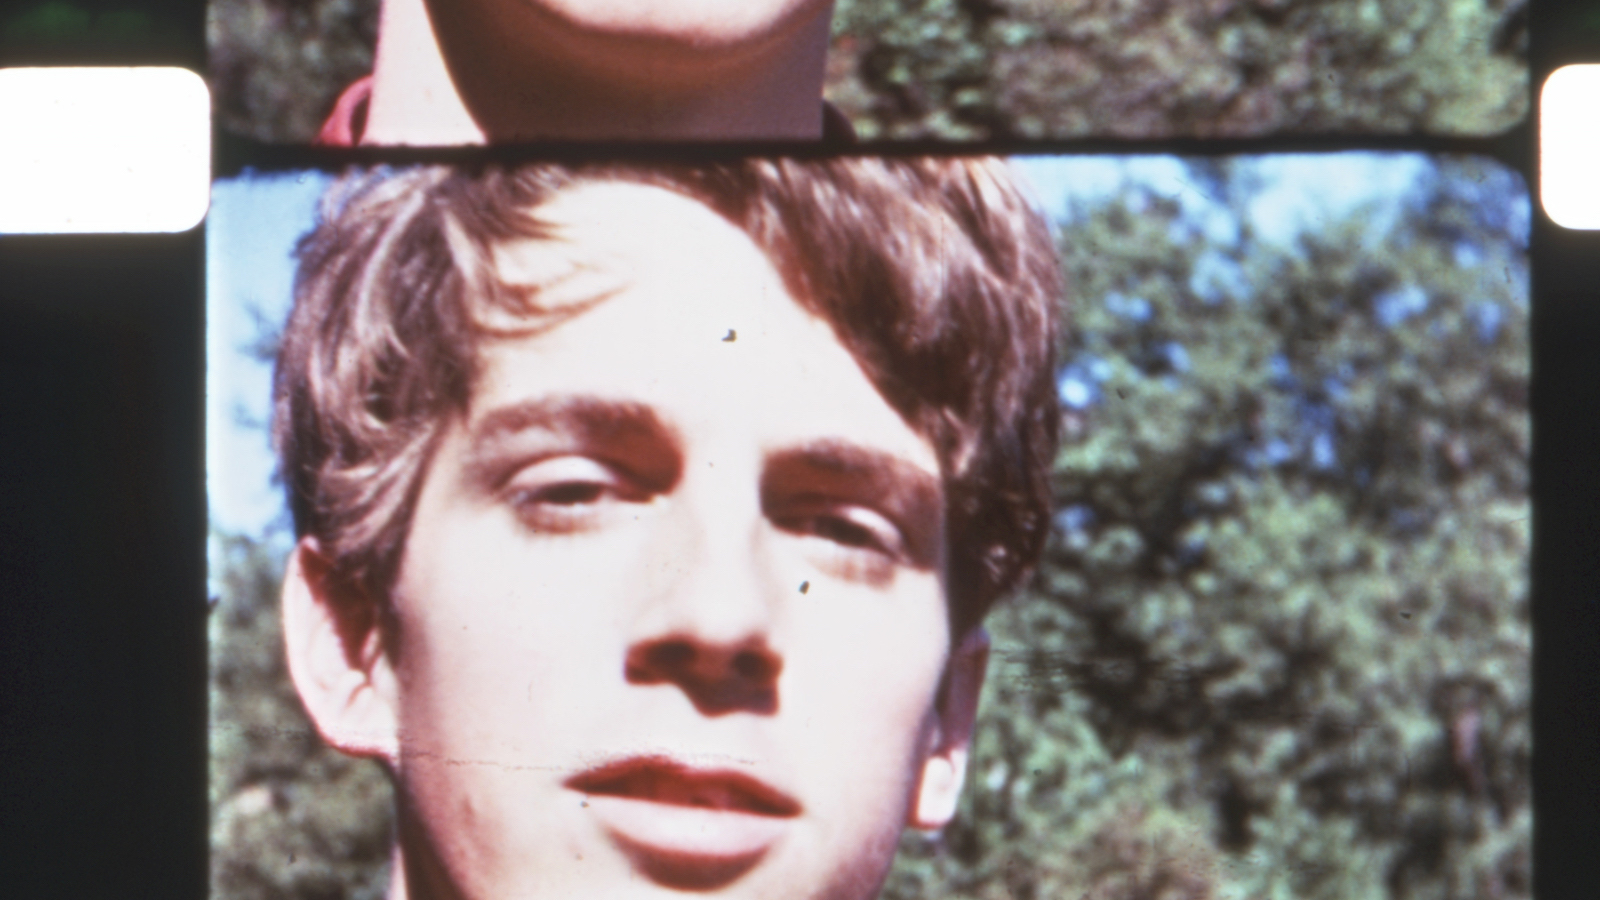 A close-up of a man on 16mm color film looking into camera.